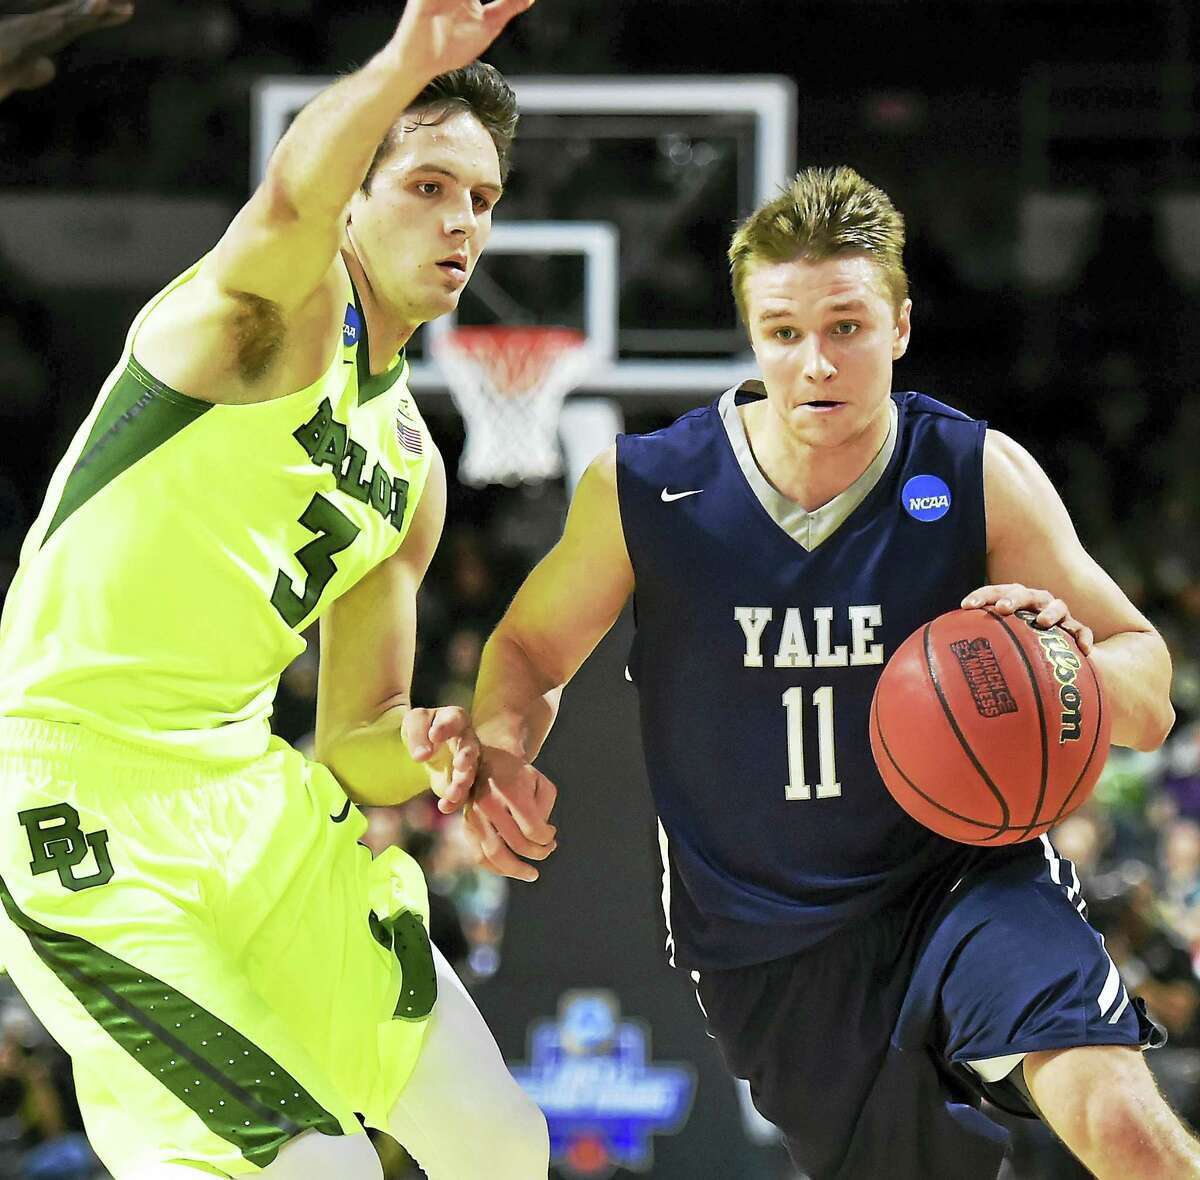 Yale's Makai Mason drives to the hoop as Baylor's Alex Copeland defends in the 79-75 victory for the Bulldogs in the first round of the 2016 NCAA Men's Basketball Tournament at the Dunkin' Donuts Center in Providence, RI. (Catherine Avalone/New Haven Register)